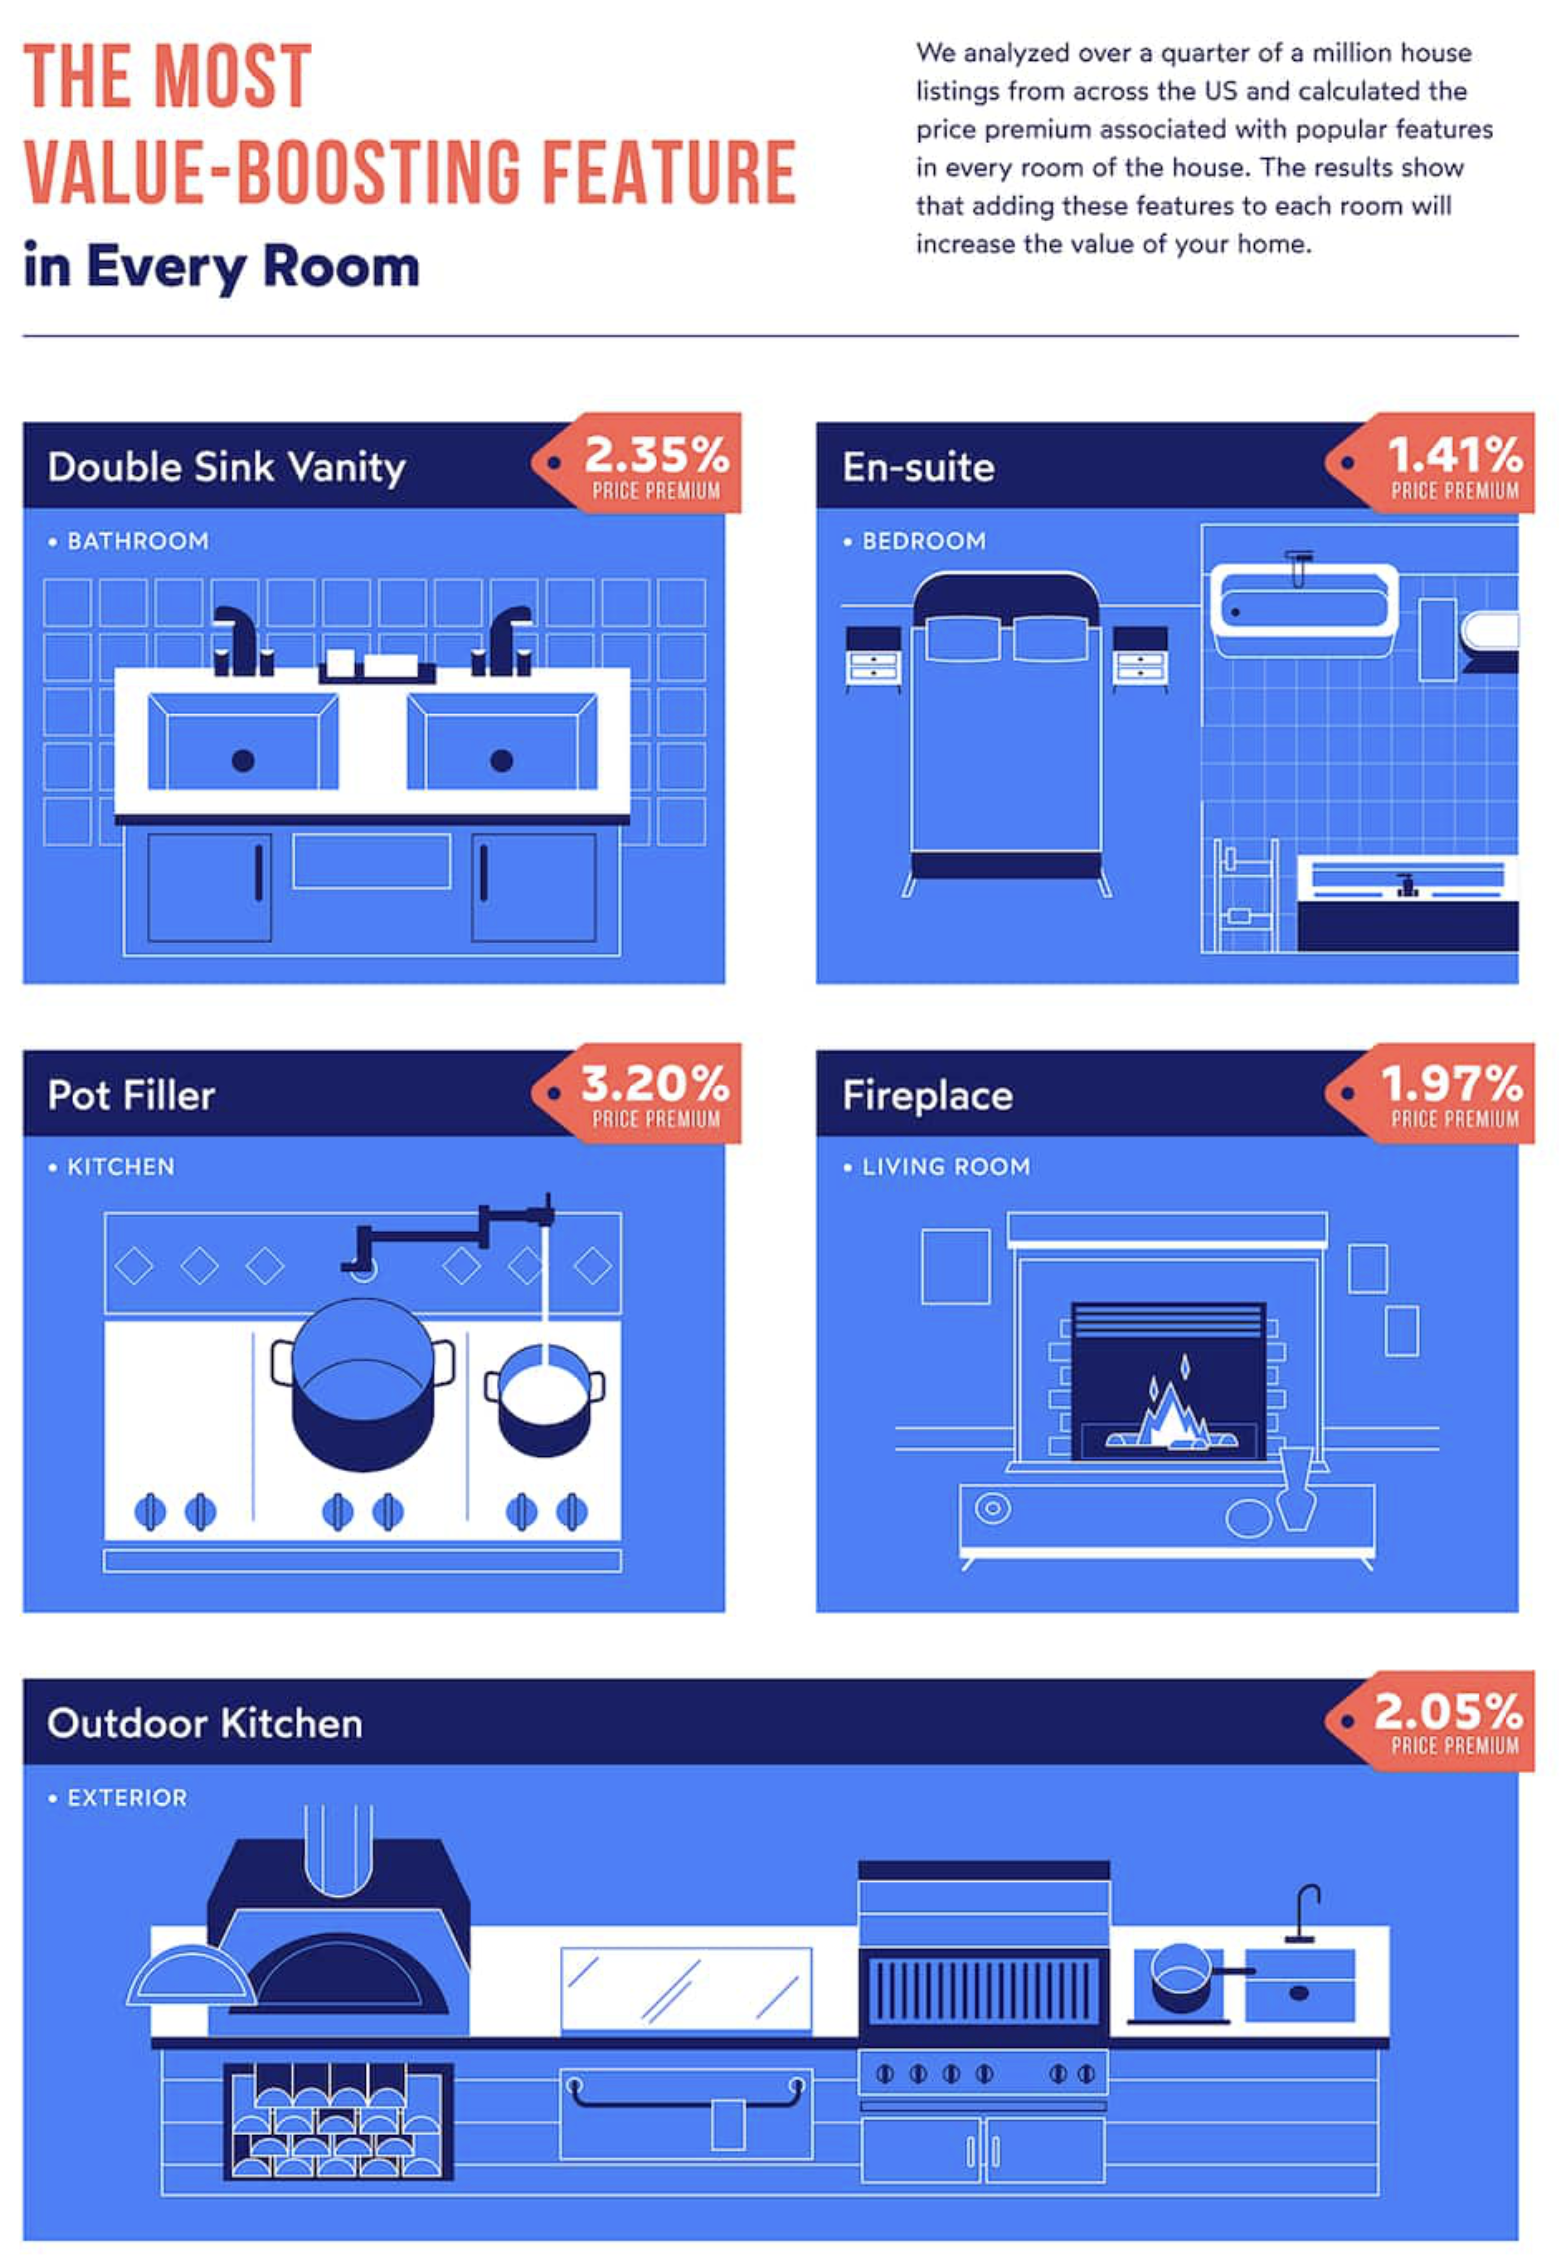 A graphic showing the most popular unconventional home features attracting buyers.